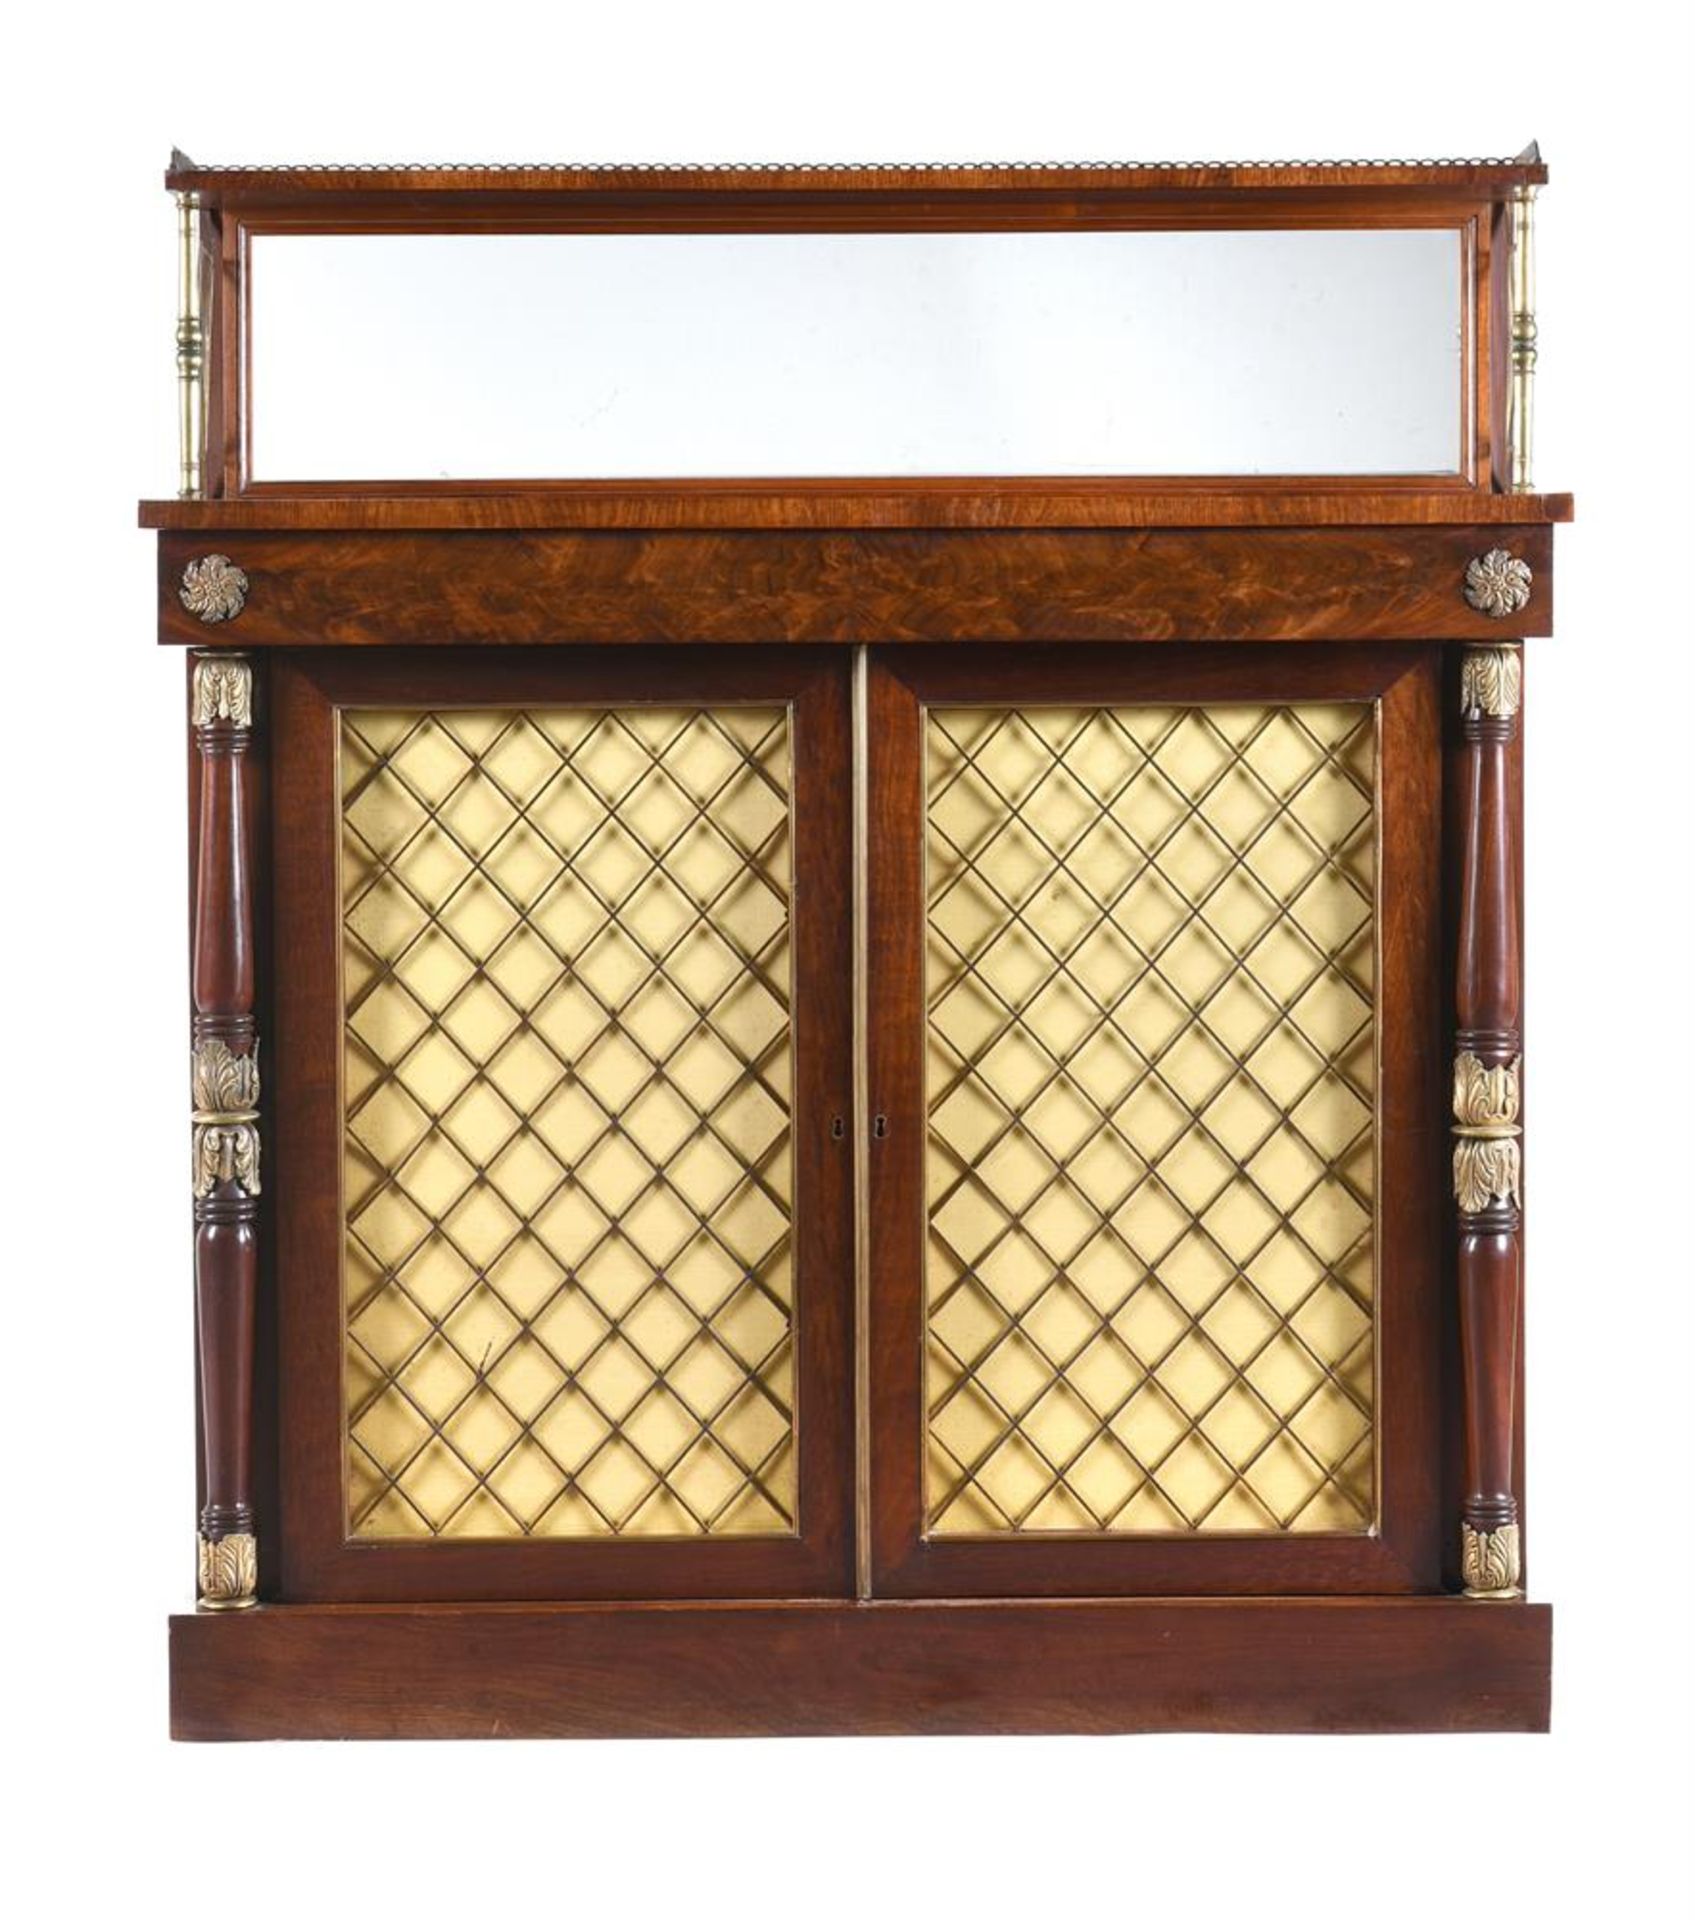 A REGENCY MAHOGANY AND GILT METAL MOUNTED SIDE CABINET